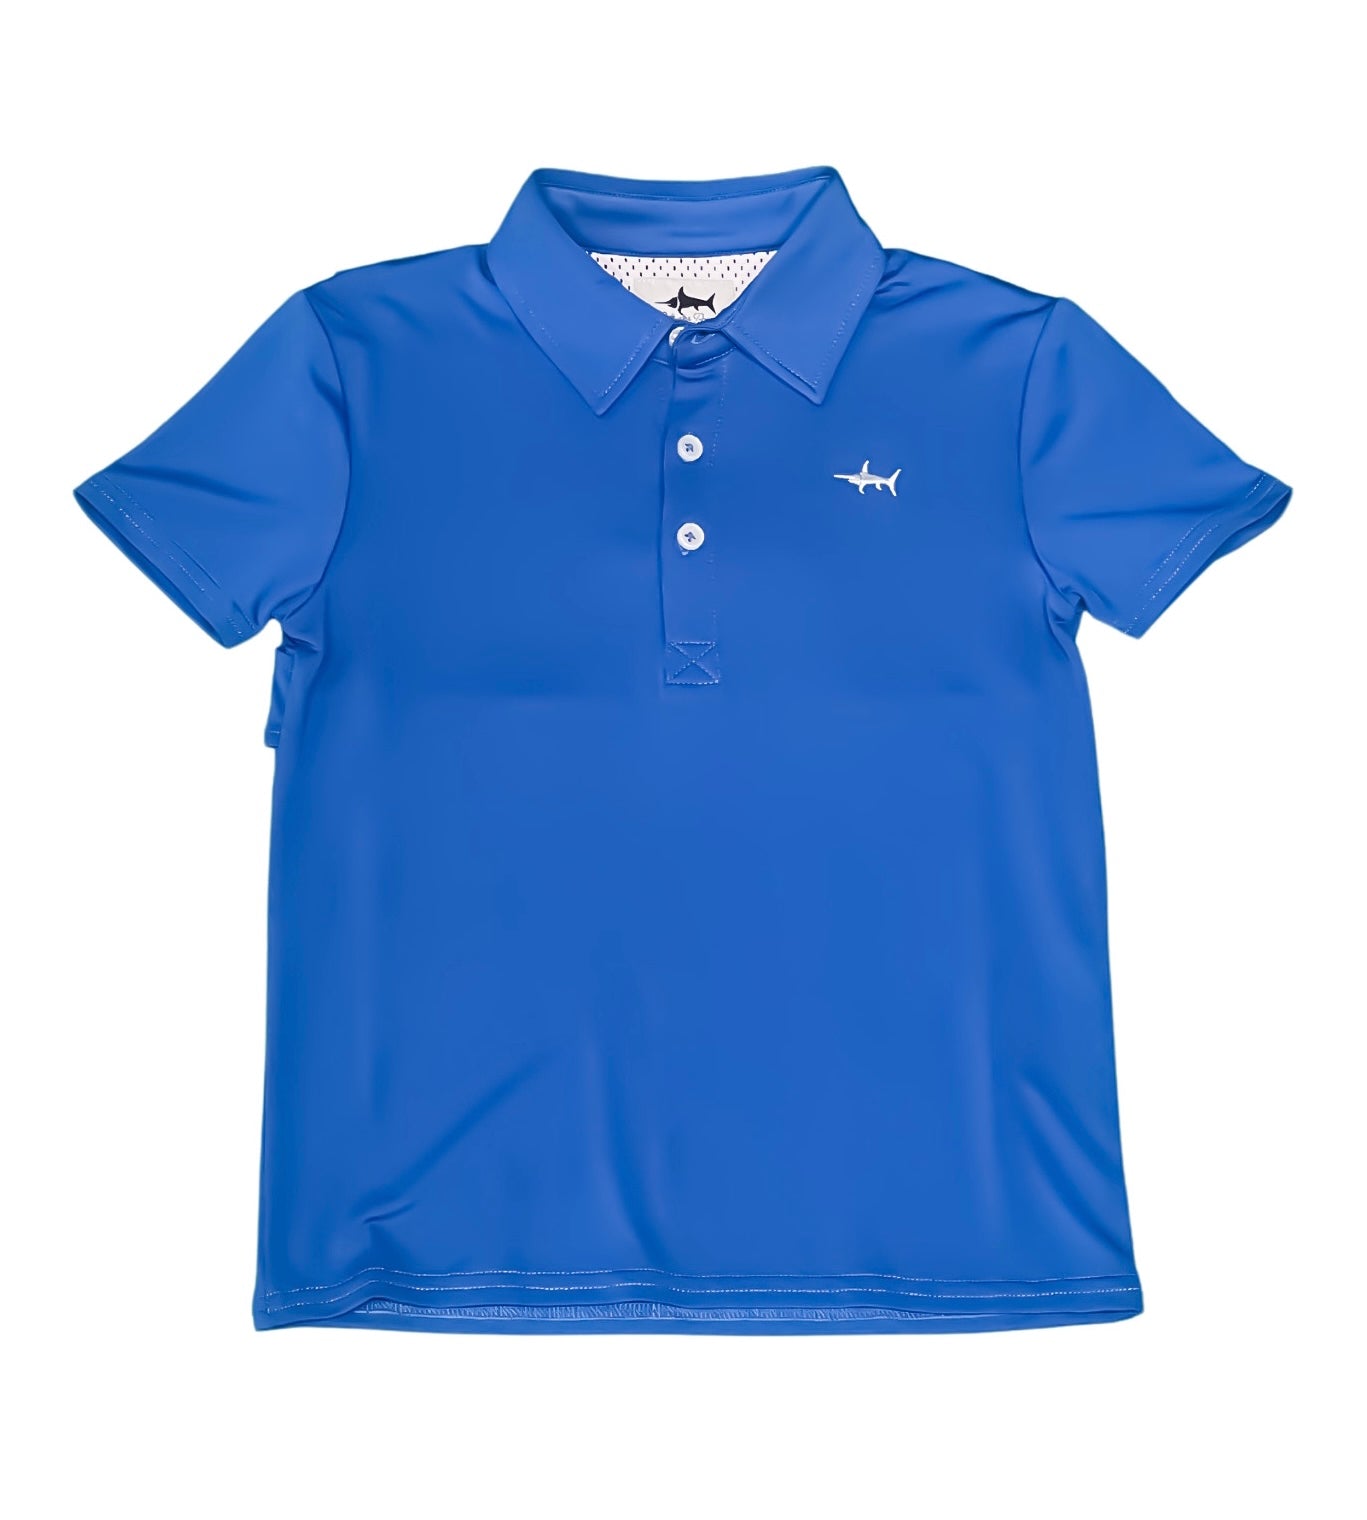 OFFSHORE PERFORMANCE POLO ROYAL BLUE